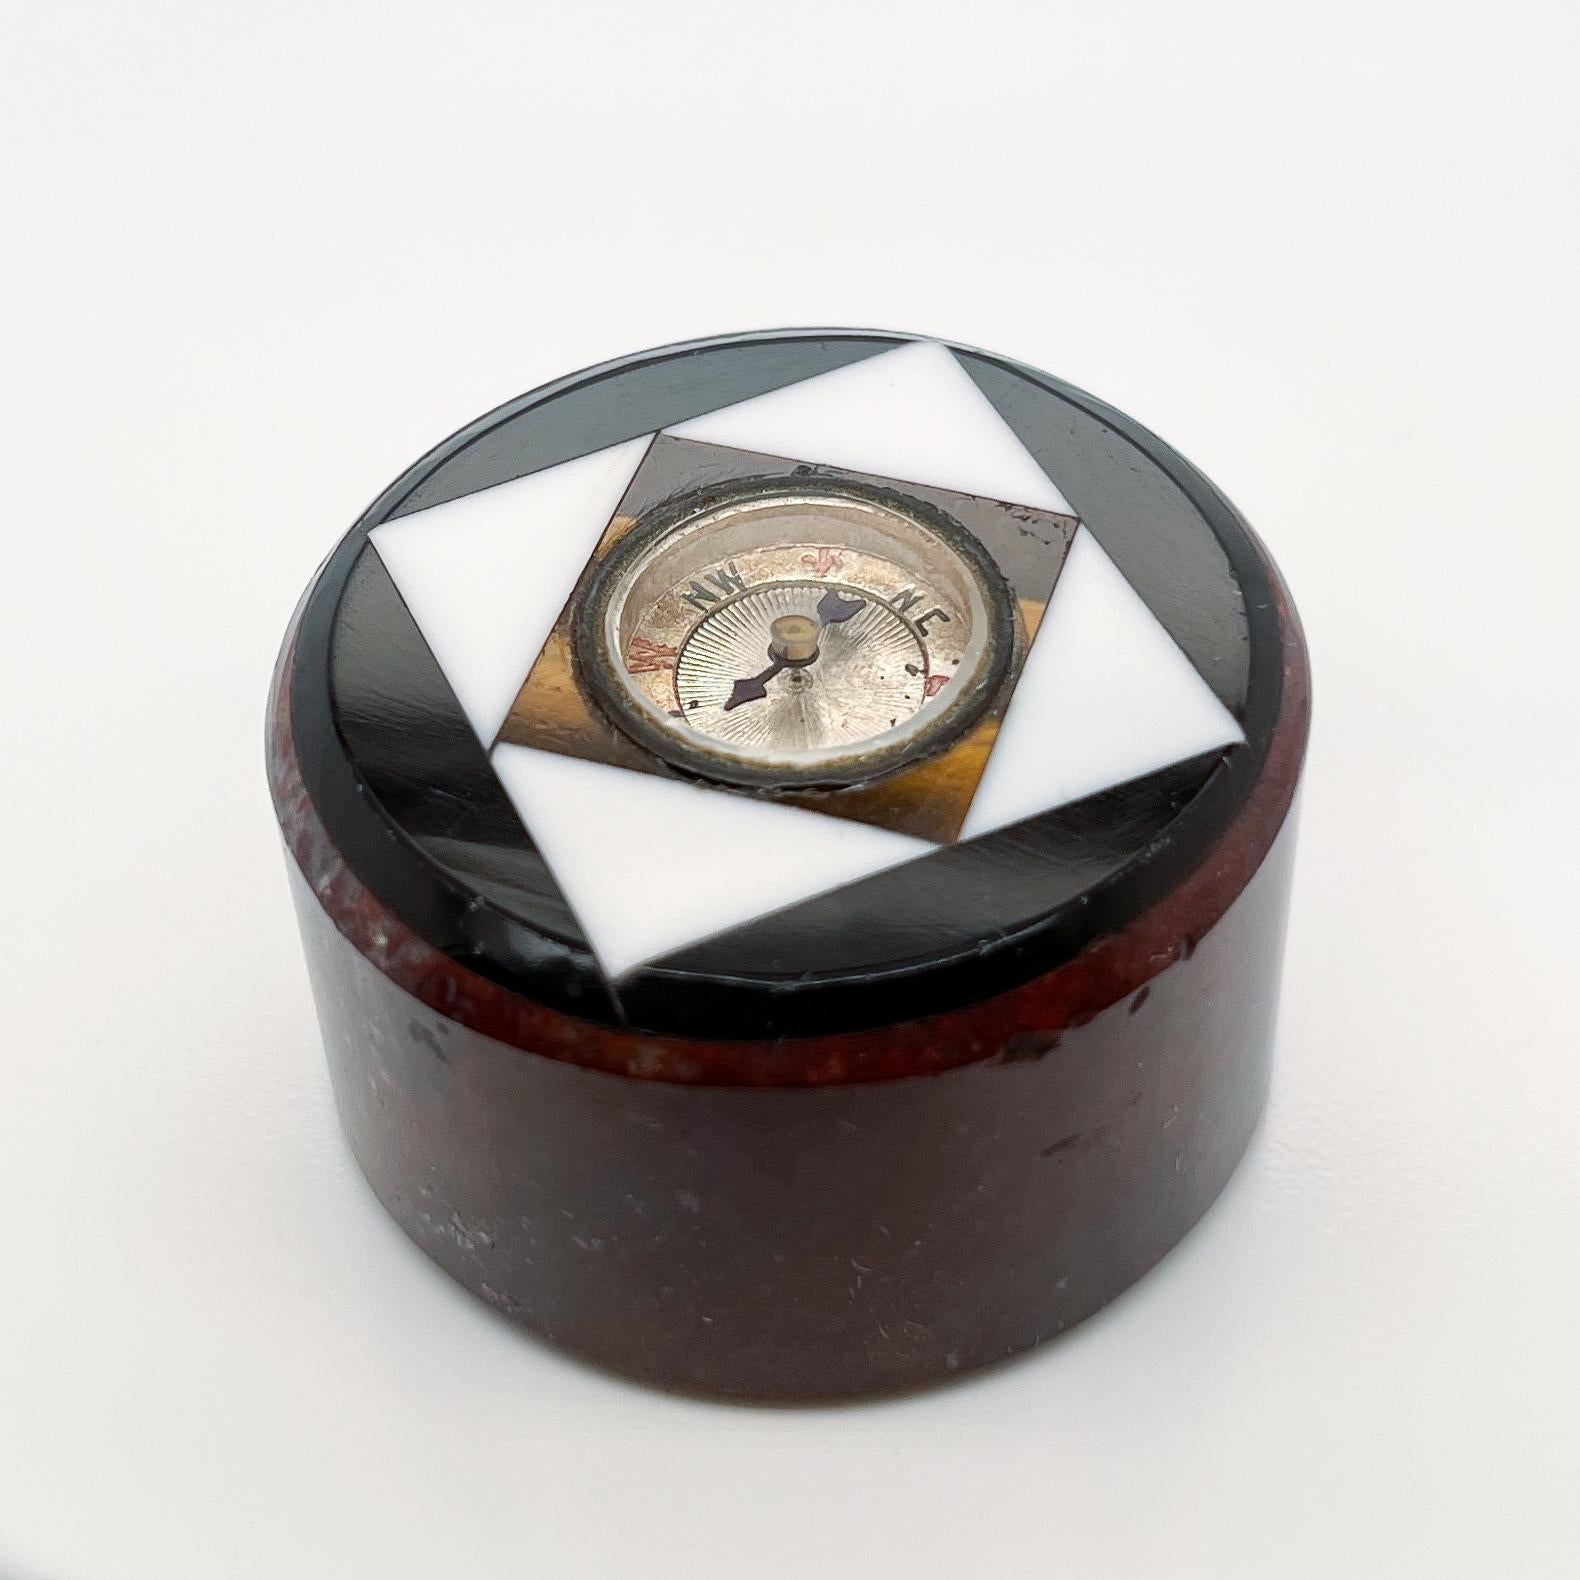 A fine miniature antique compass.

Set in a matrix of specimen gemstones and hardstones.

The stones include tiger's eye, both white & black onyx, and a red jasper or marble base.

Simply a wonderful Wunderkammer or Curio Cabinet piece!

Date:
Late